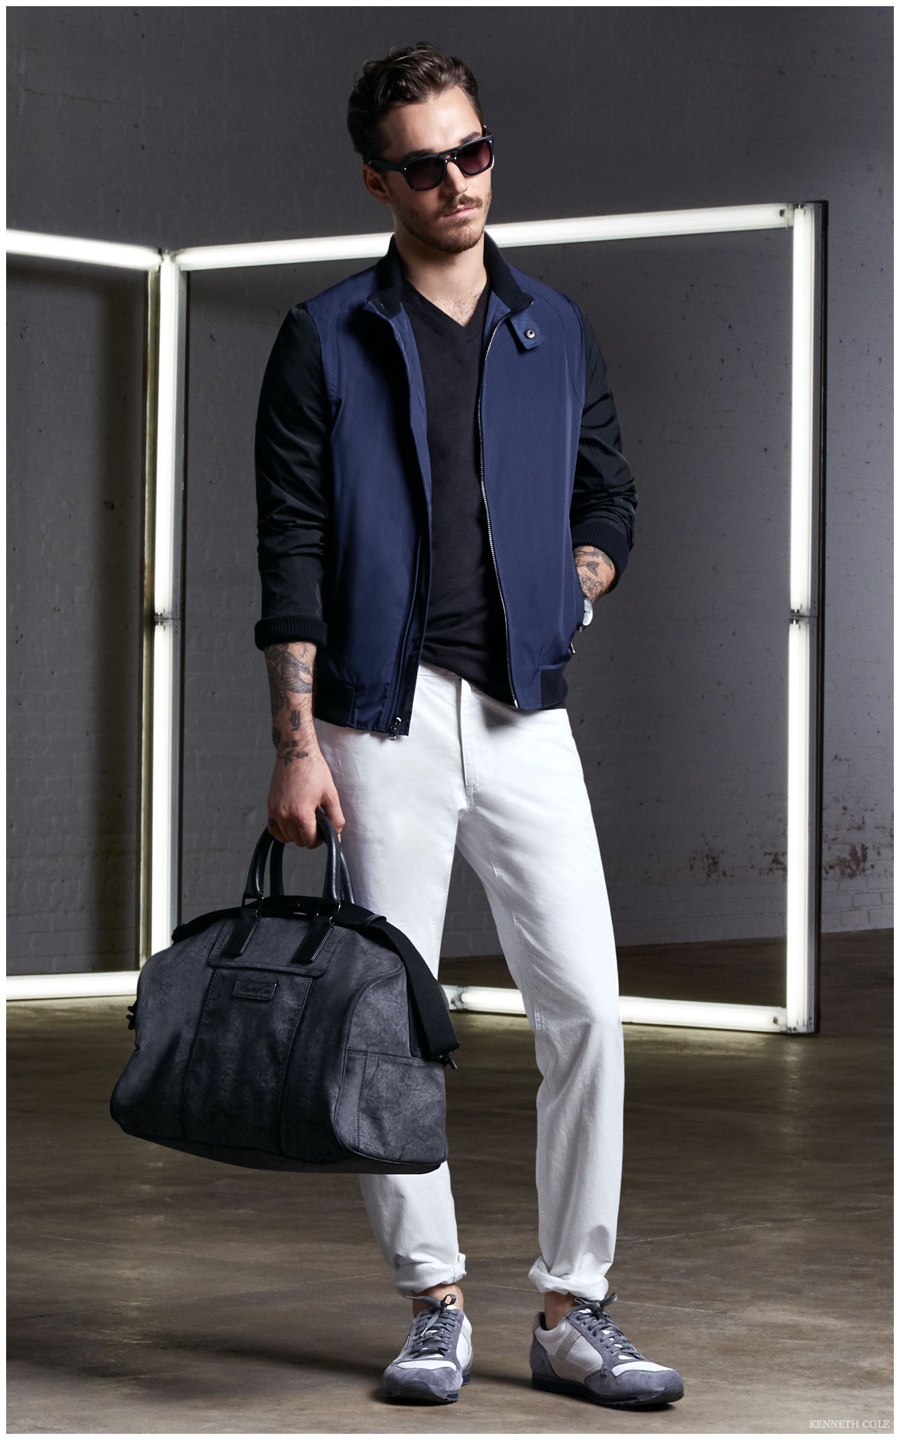 Kenneth Cole Spring/Summer 2015 Menswear Collection